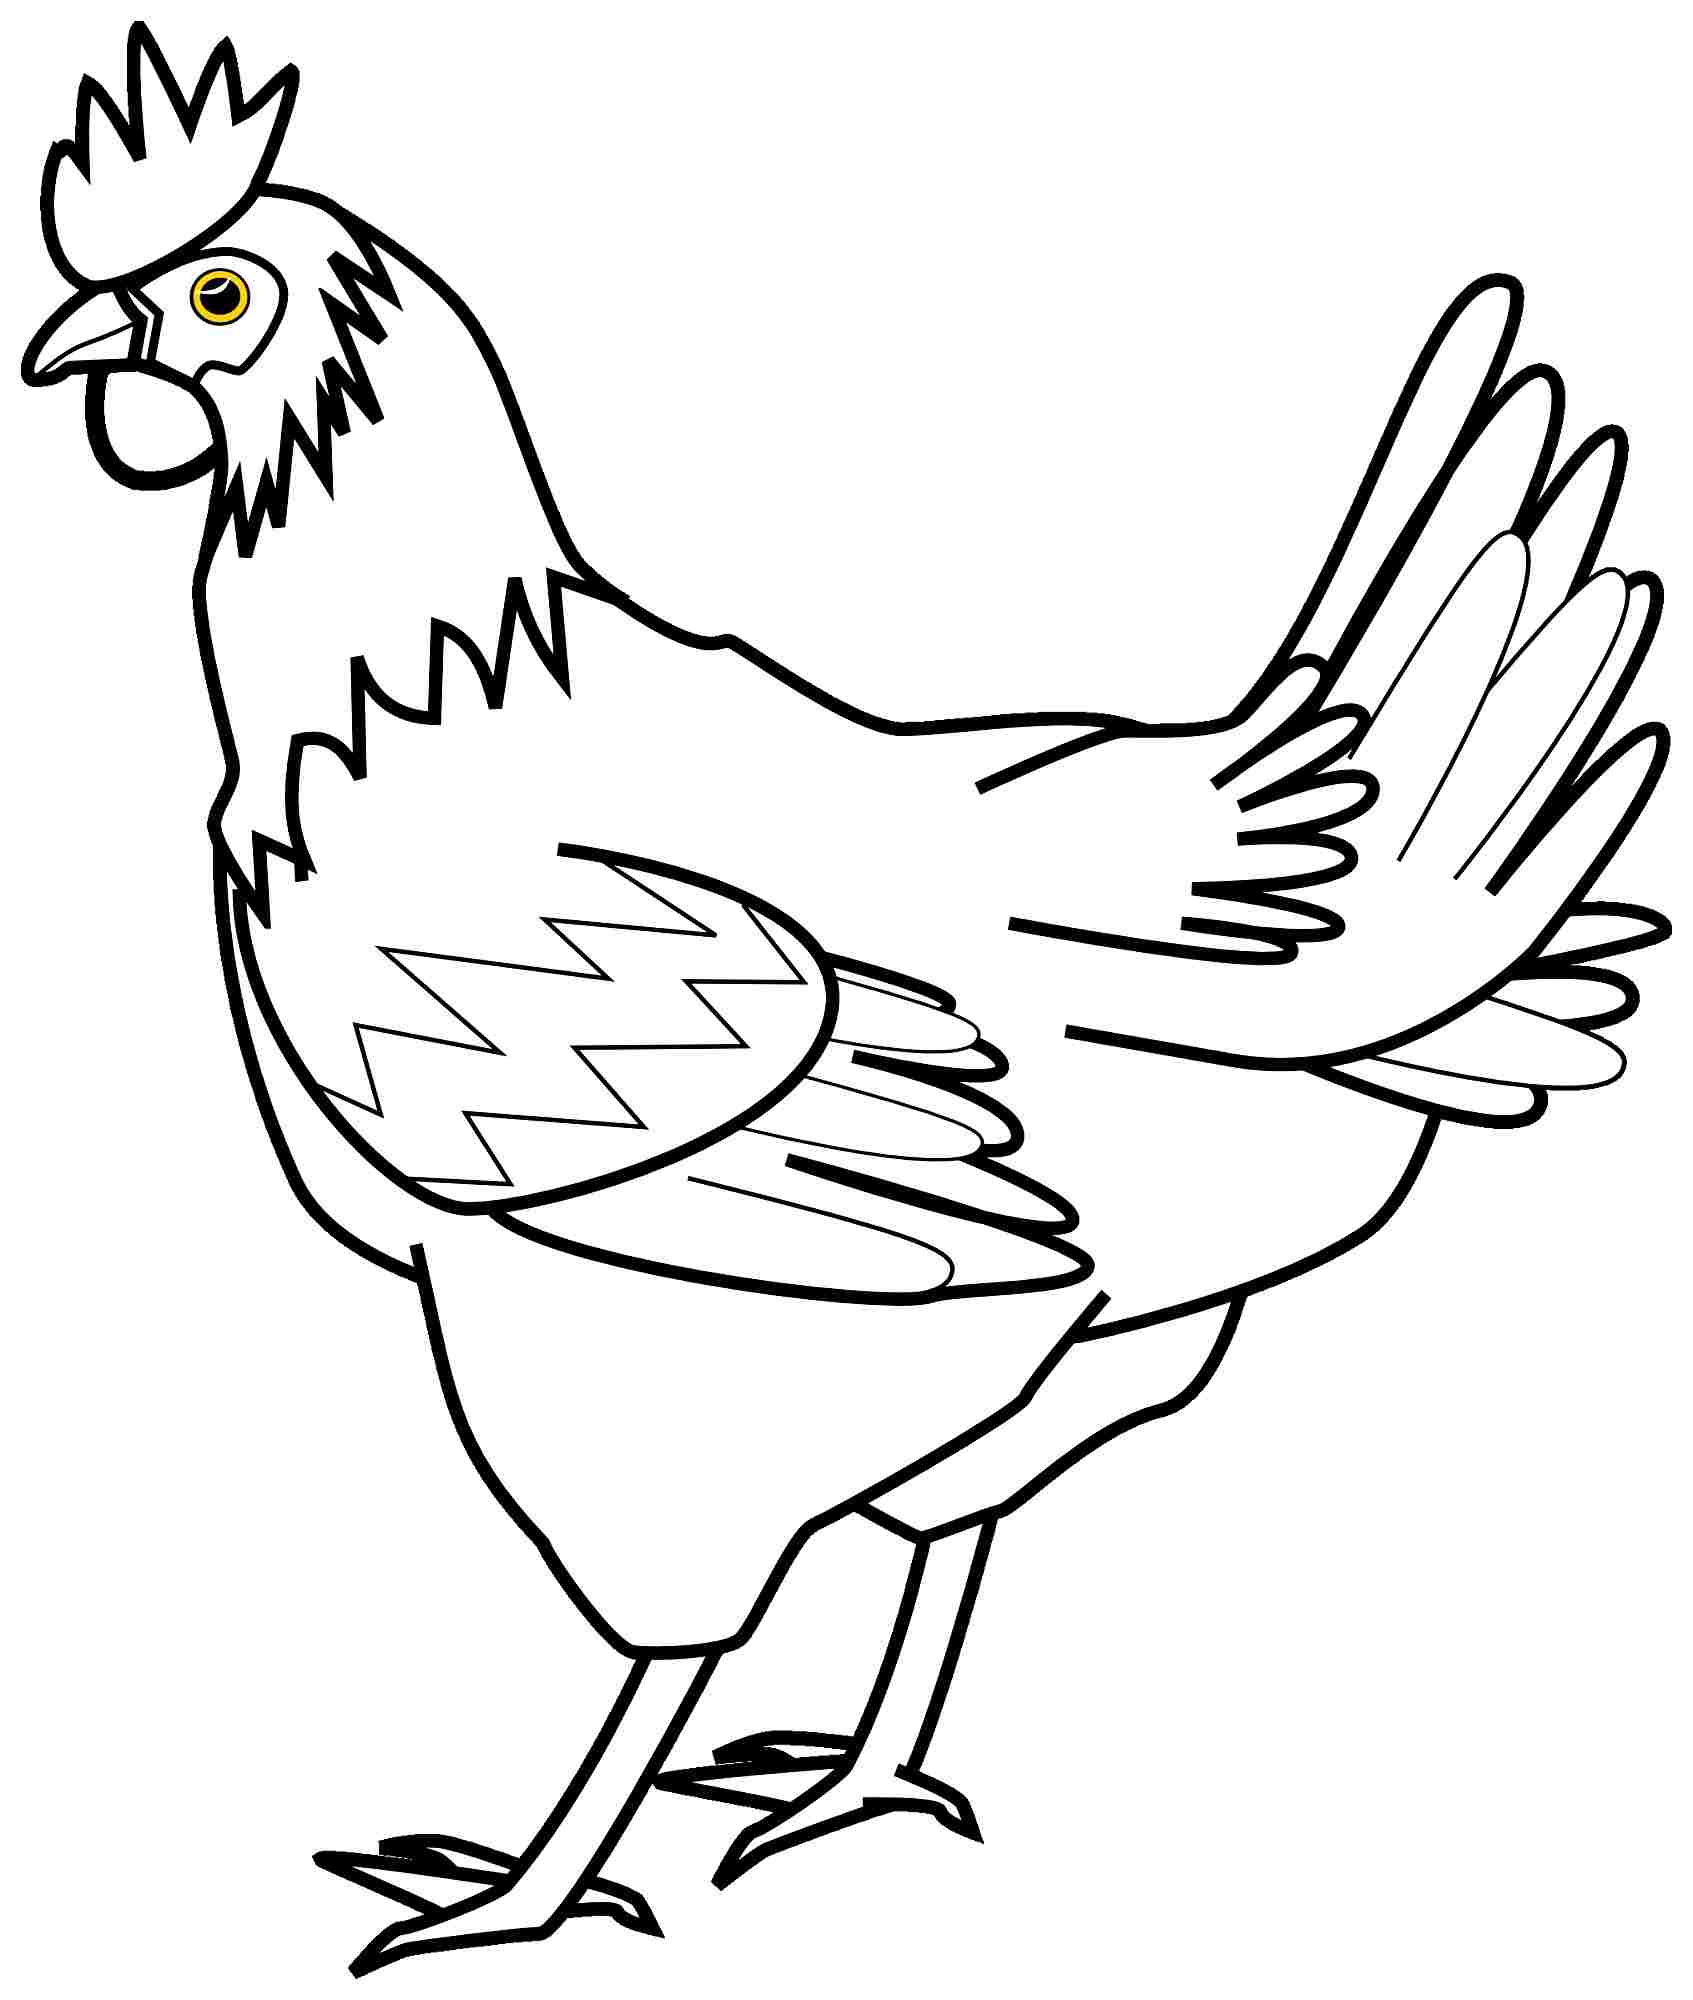 Home Poultry Rooster Hen Hand Pencil Stock Vector (Royalty Free) 526082065  | Shutterstock | Drawings, Rooster art, Side view drawing